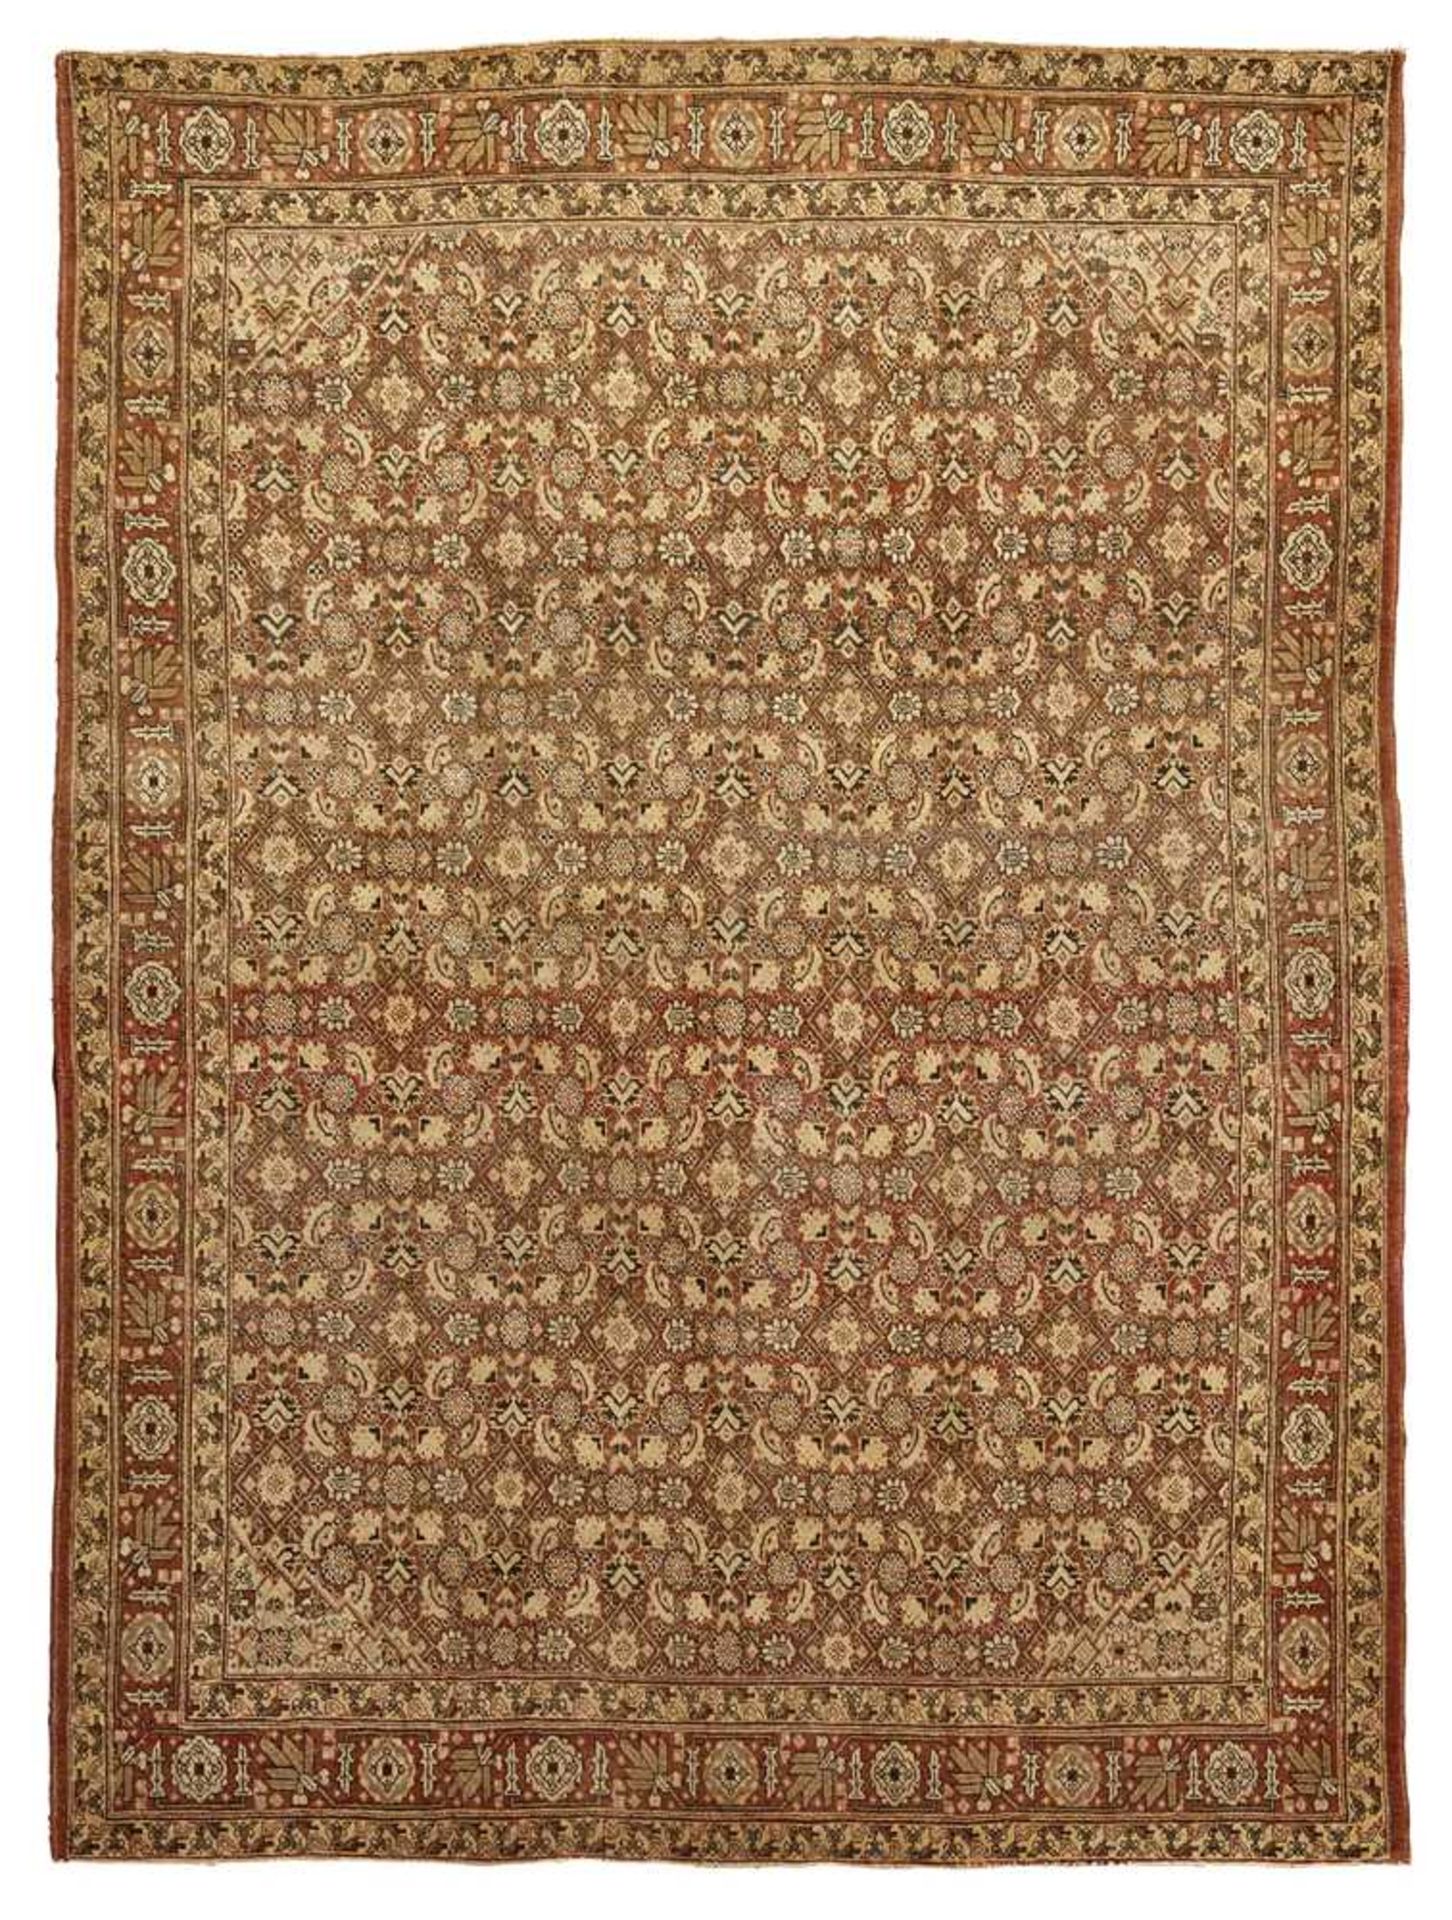 TABRIZ CARPET NORTHWEST PERSIA, LATE 19TH/EARLY 20TH CENTURY